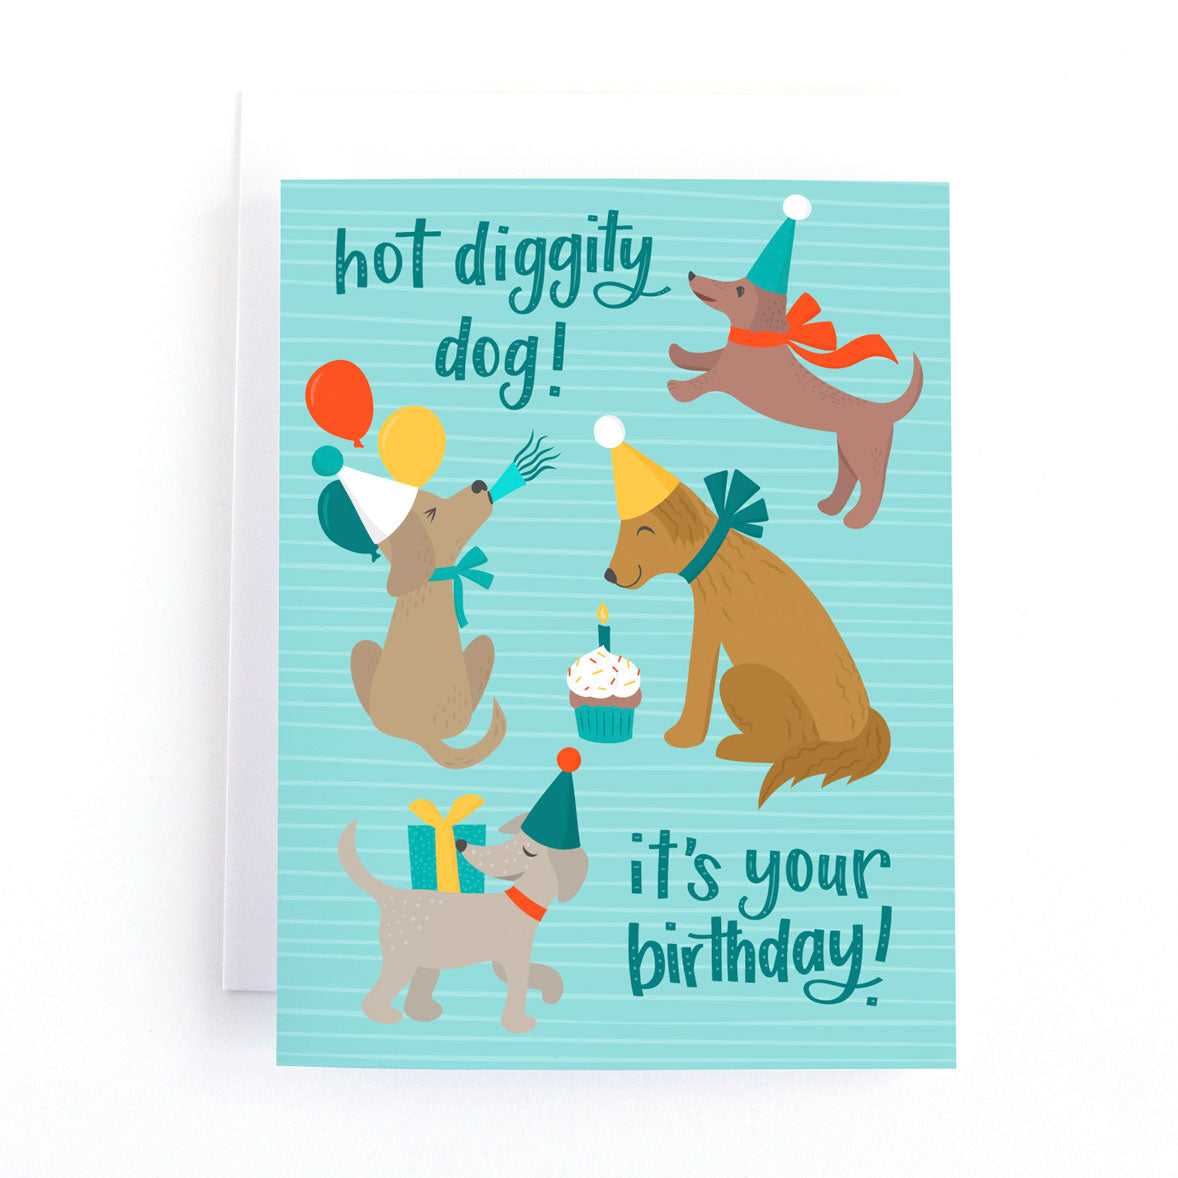 cute kids birthday card with dogs wearing party hats and the message, "hot diggity dog, it's your birthday!"